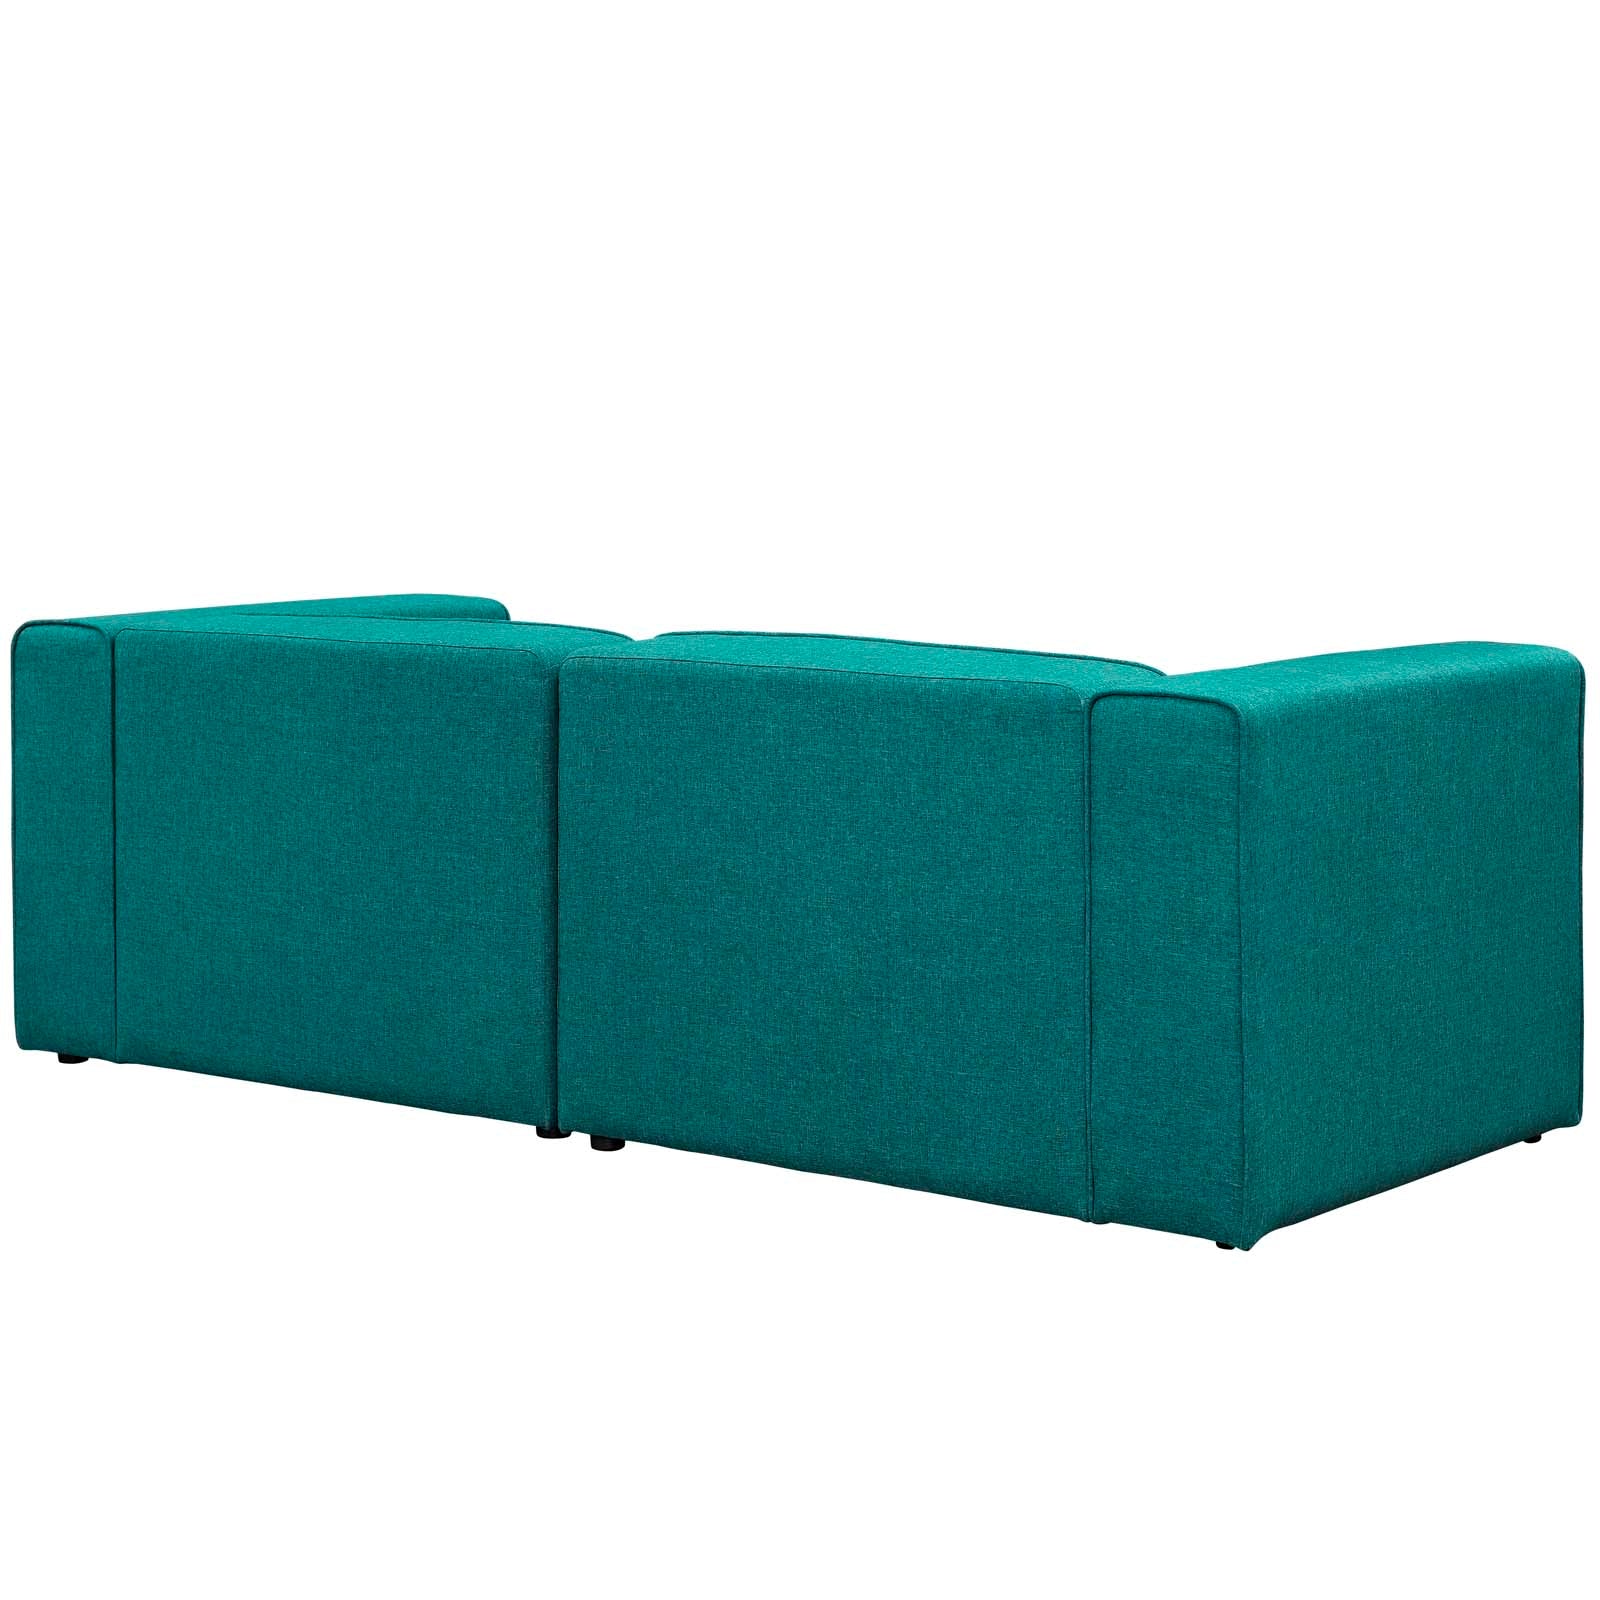 Modway Sectional Sofas - Mingle 2 Piece Upholstered Fabric Sectional Sofa Set Teal